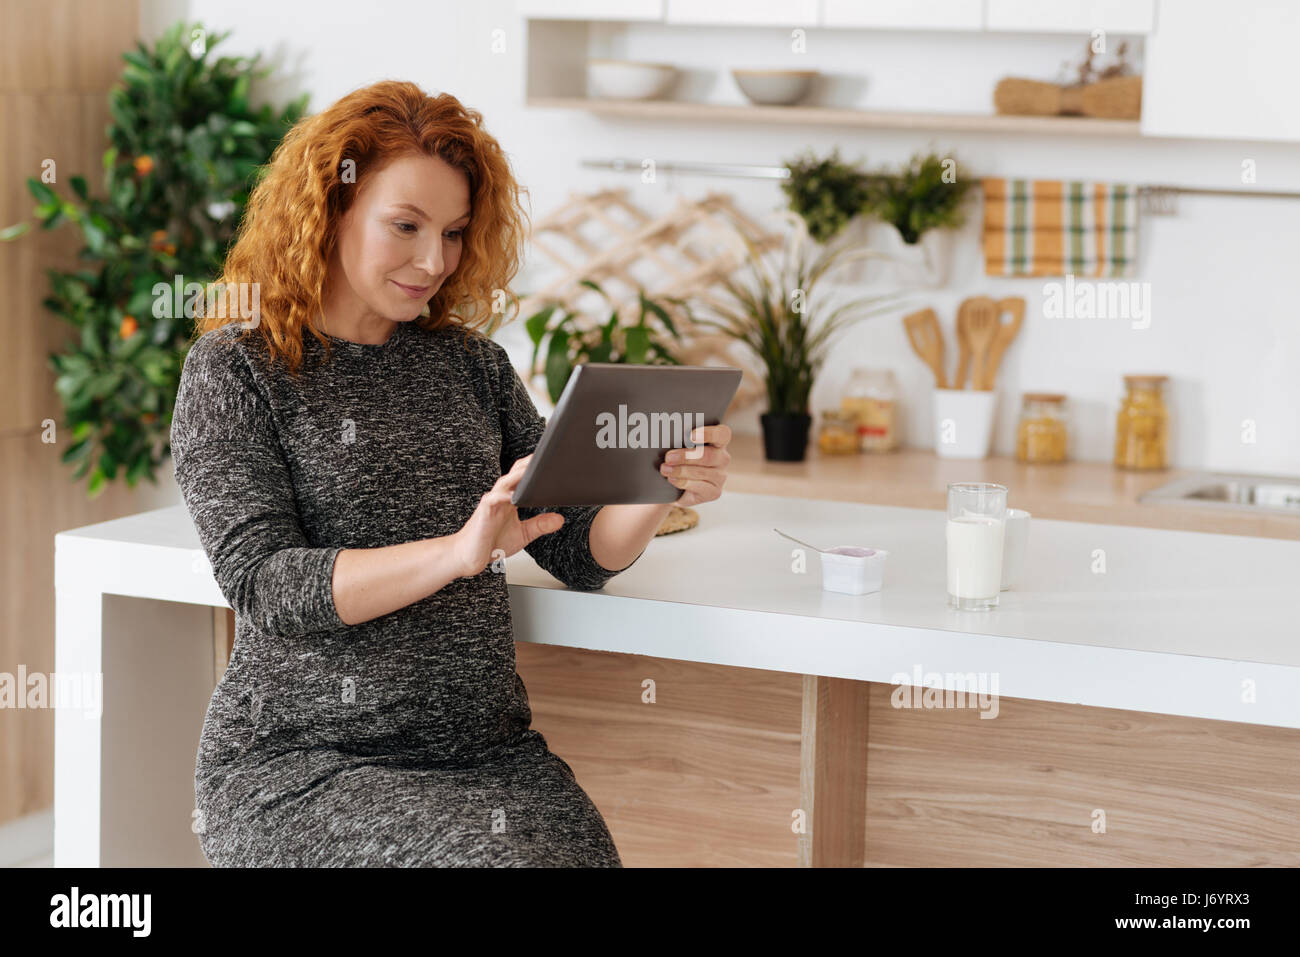 Curly-haired expectant woman working on digital tablet Stock Photo